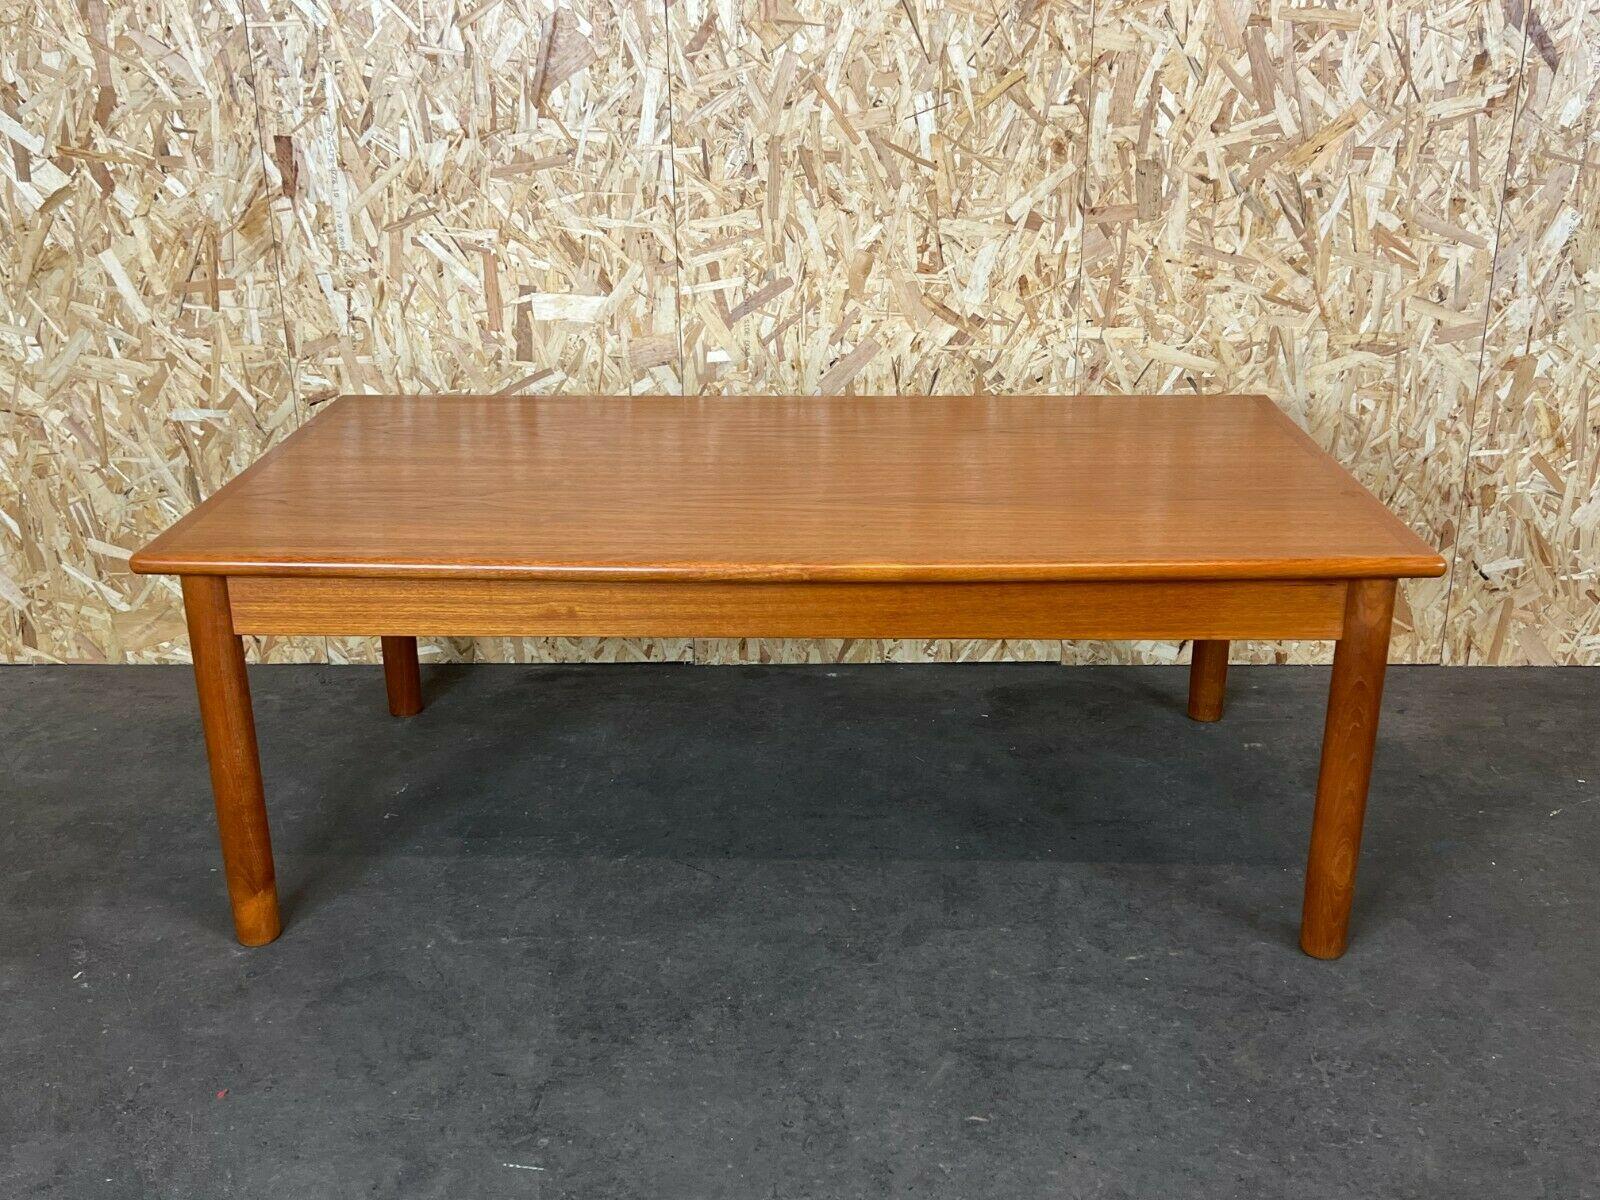 60s 70s Teak Table Coffee Table Danish Modern Design Denmark

Object: coffee table

Manufacturer:

Condition: good

Age: around 1960-1970

Dimensions:

140cm x 77.5cm x 50cm

Other notes:

The pictures serve as part of the